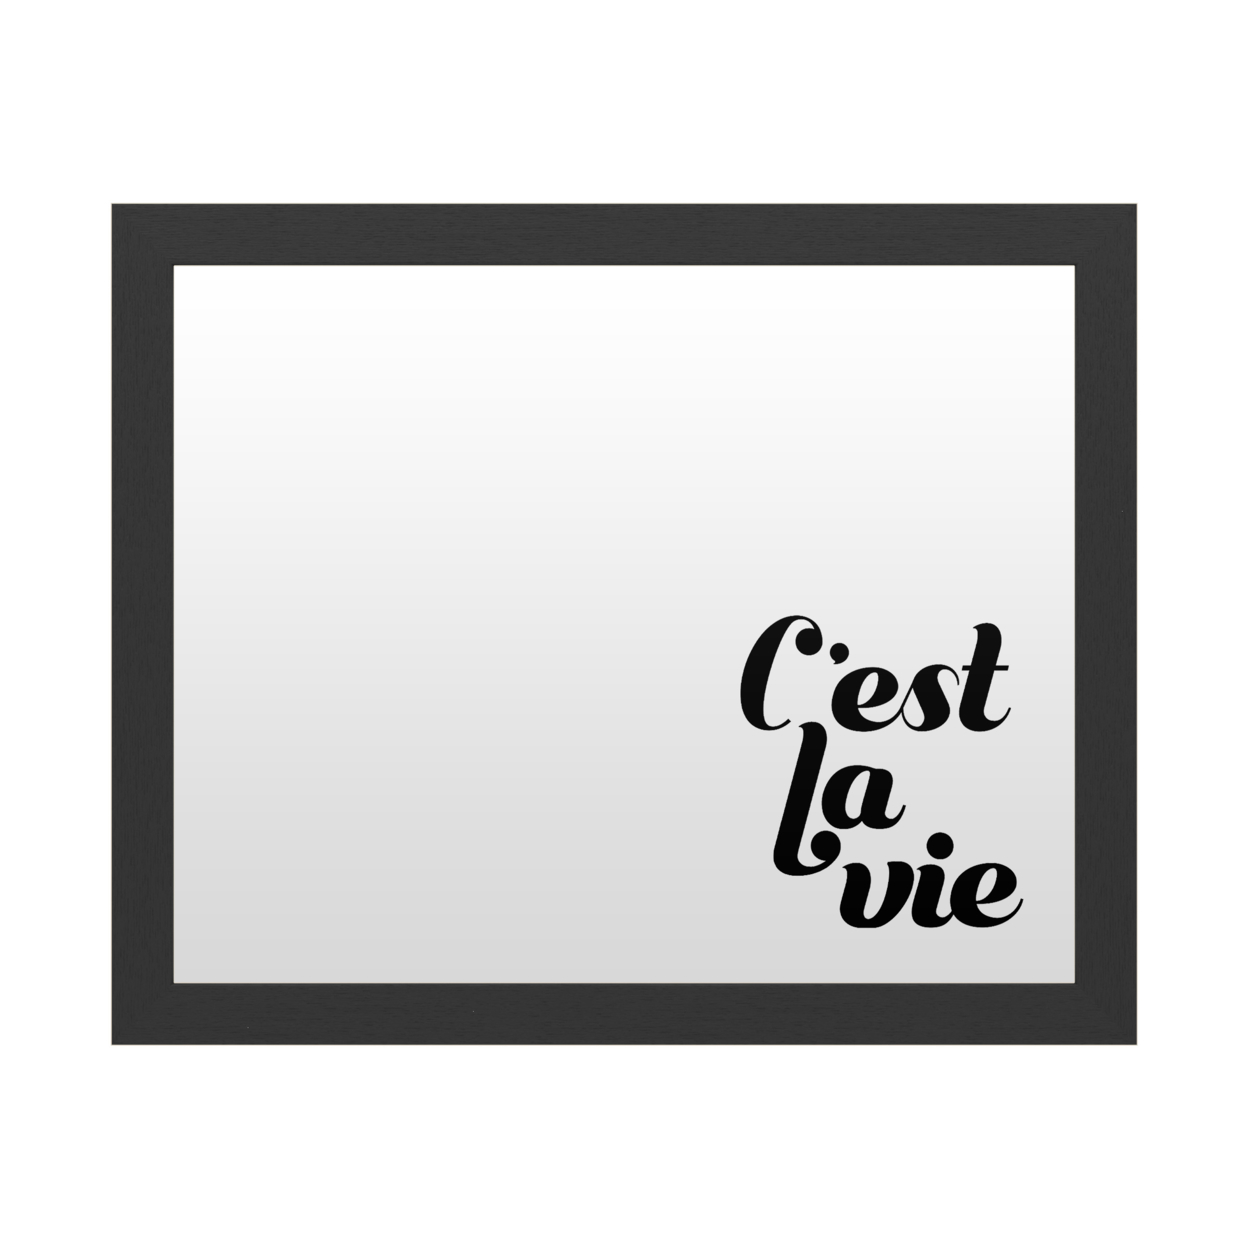 Dry Erase 16 X 20 Marker Board With Printed Artwork - Grace Popp La Vie IV White Board - Ready To Hang